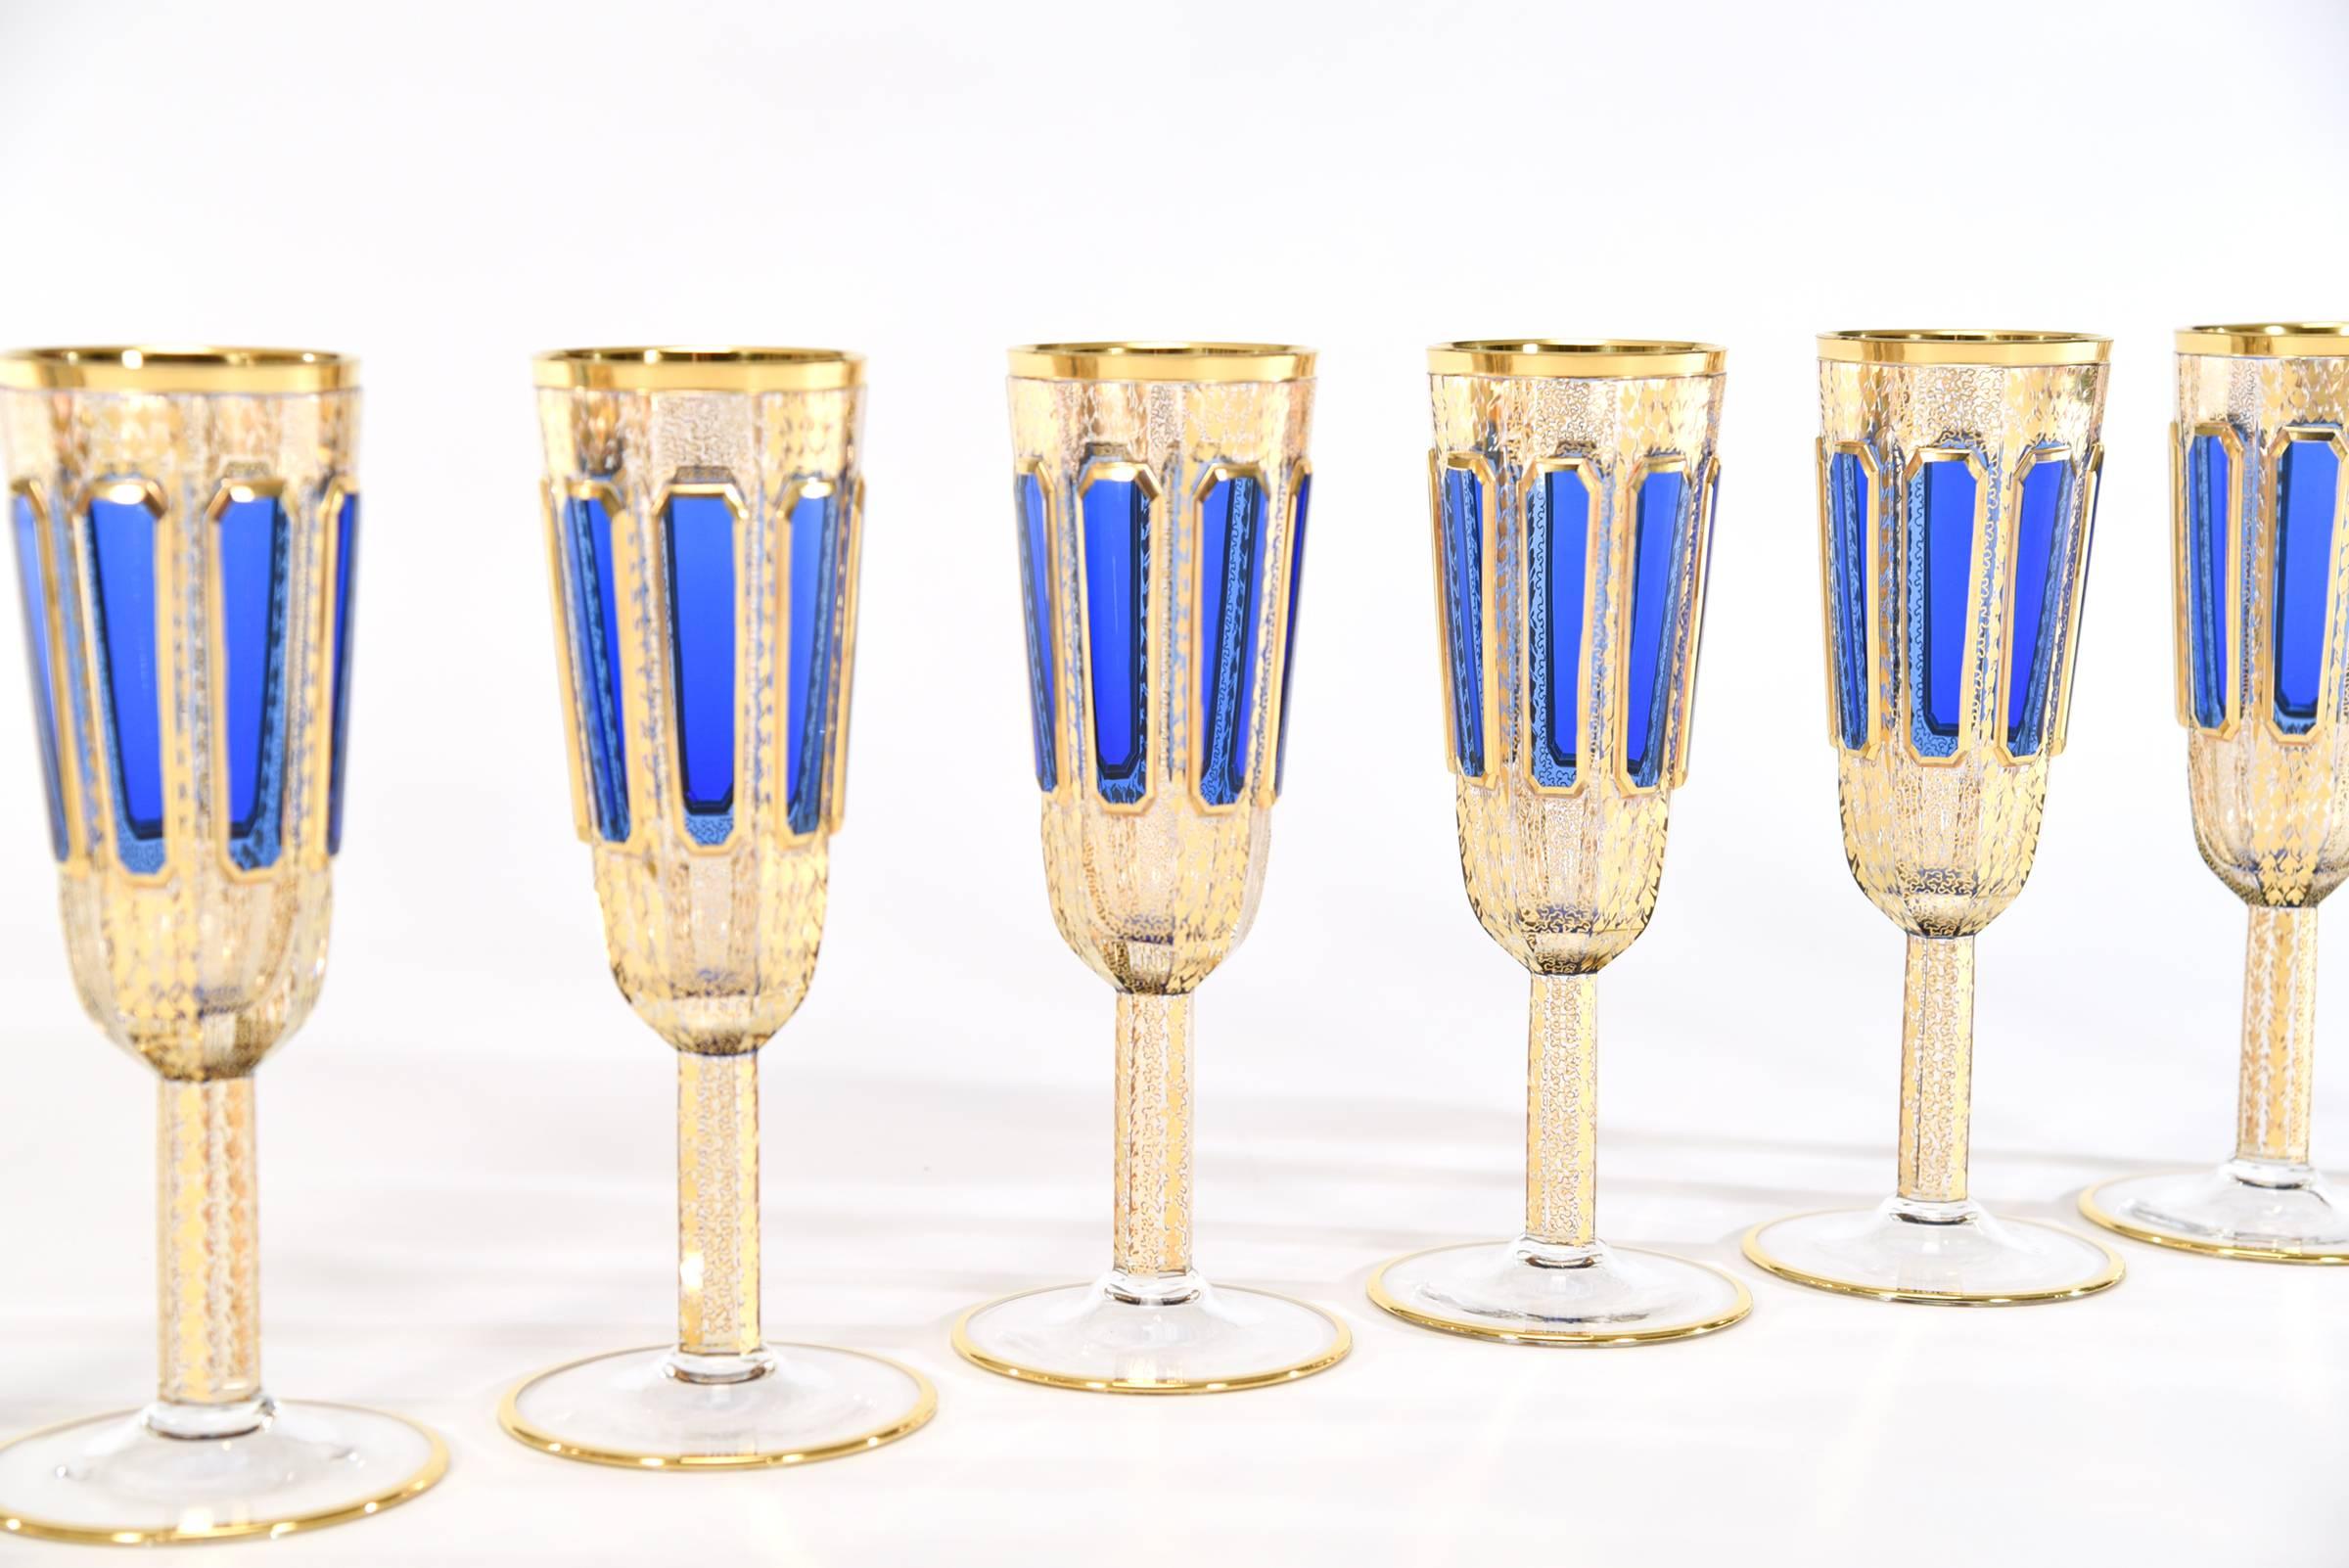 This set of eight Bohemian handblown crystal champagne flutes are quite rare and in a sought after size. Part of a larger matching set of goblets, made by Moser, they feature elongated raised panels of rich sapphire blue 